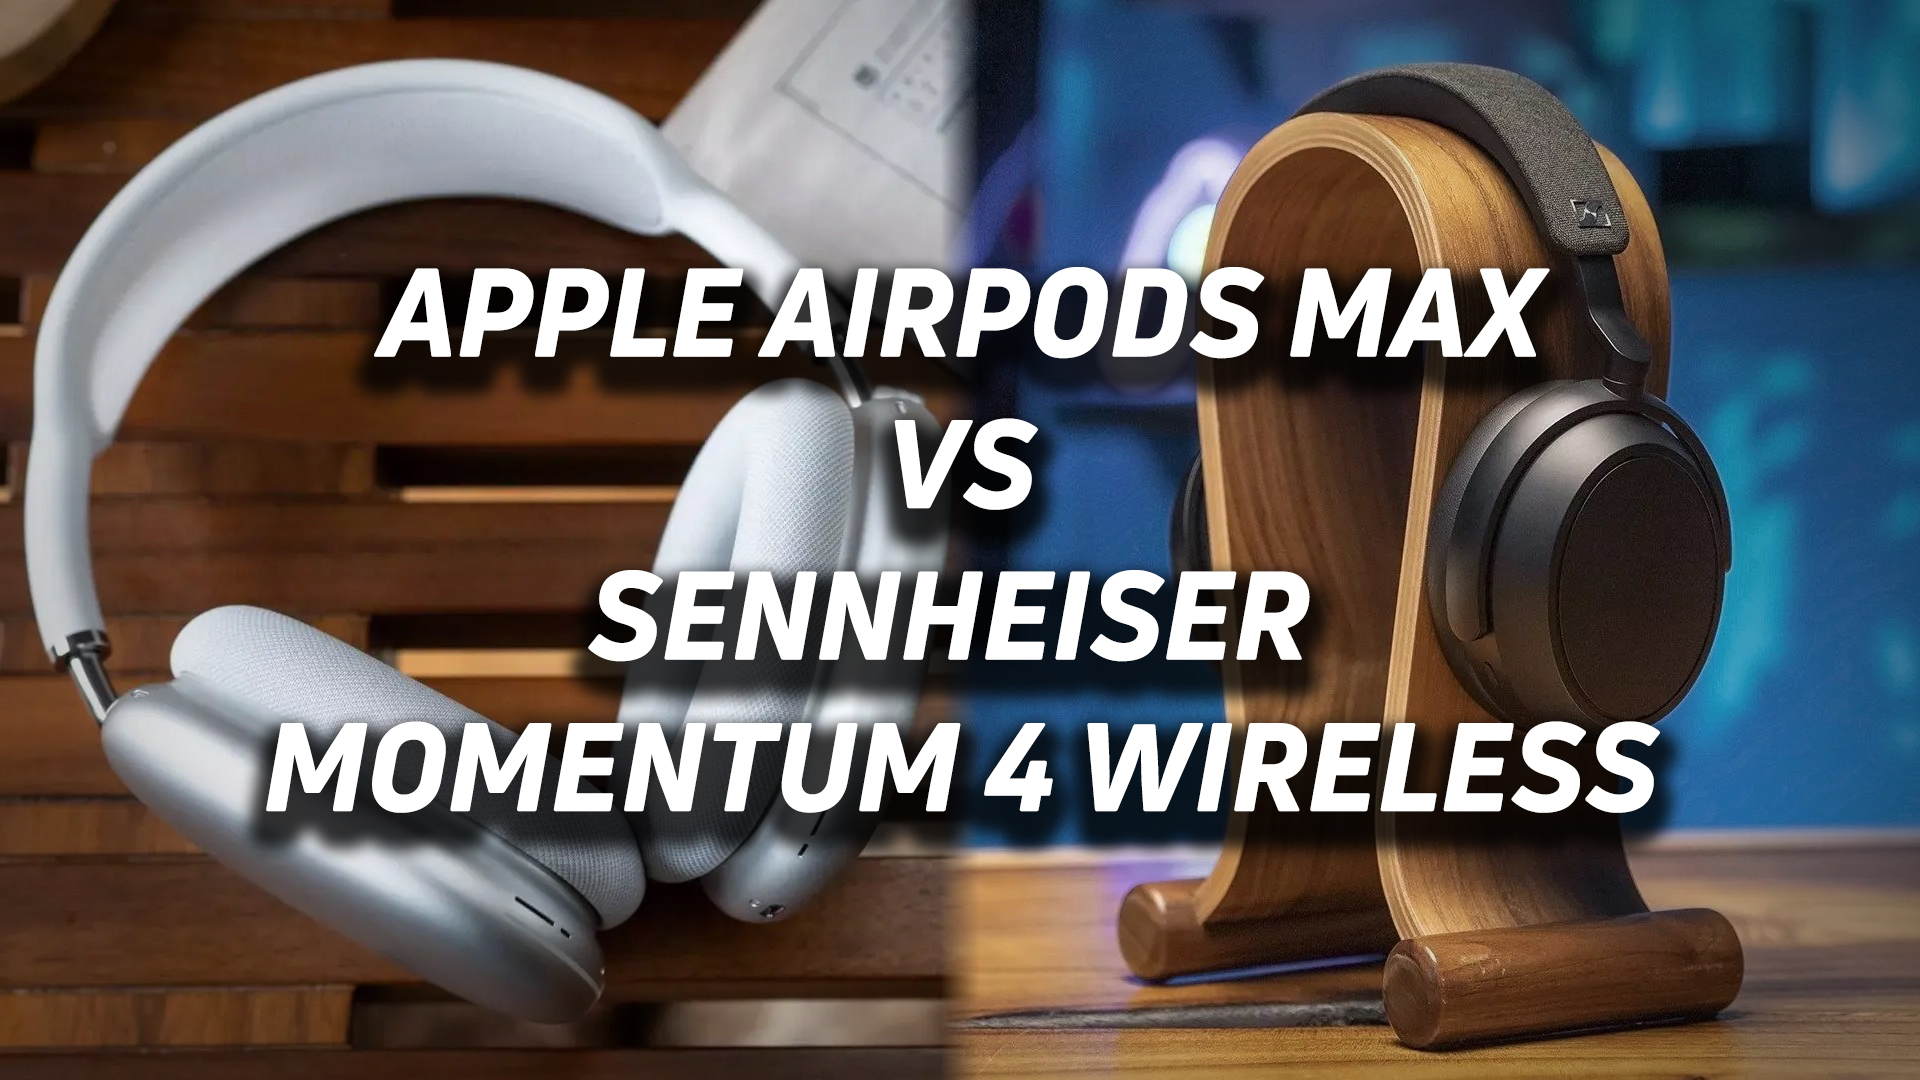 The featured image for the Apple AirPods Max vs Sennheiser MOMENTUM 4 Wireless comparison article.